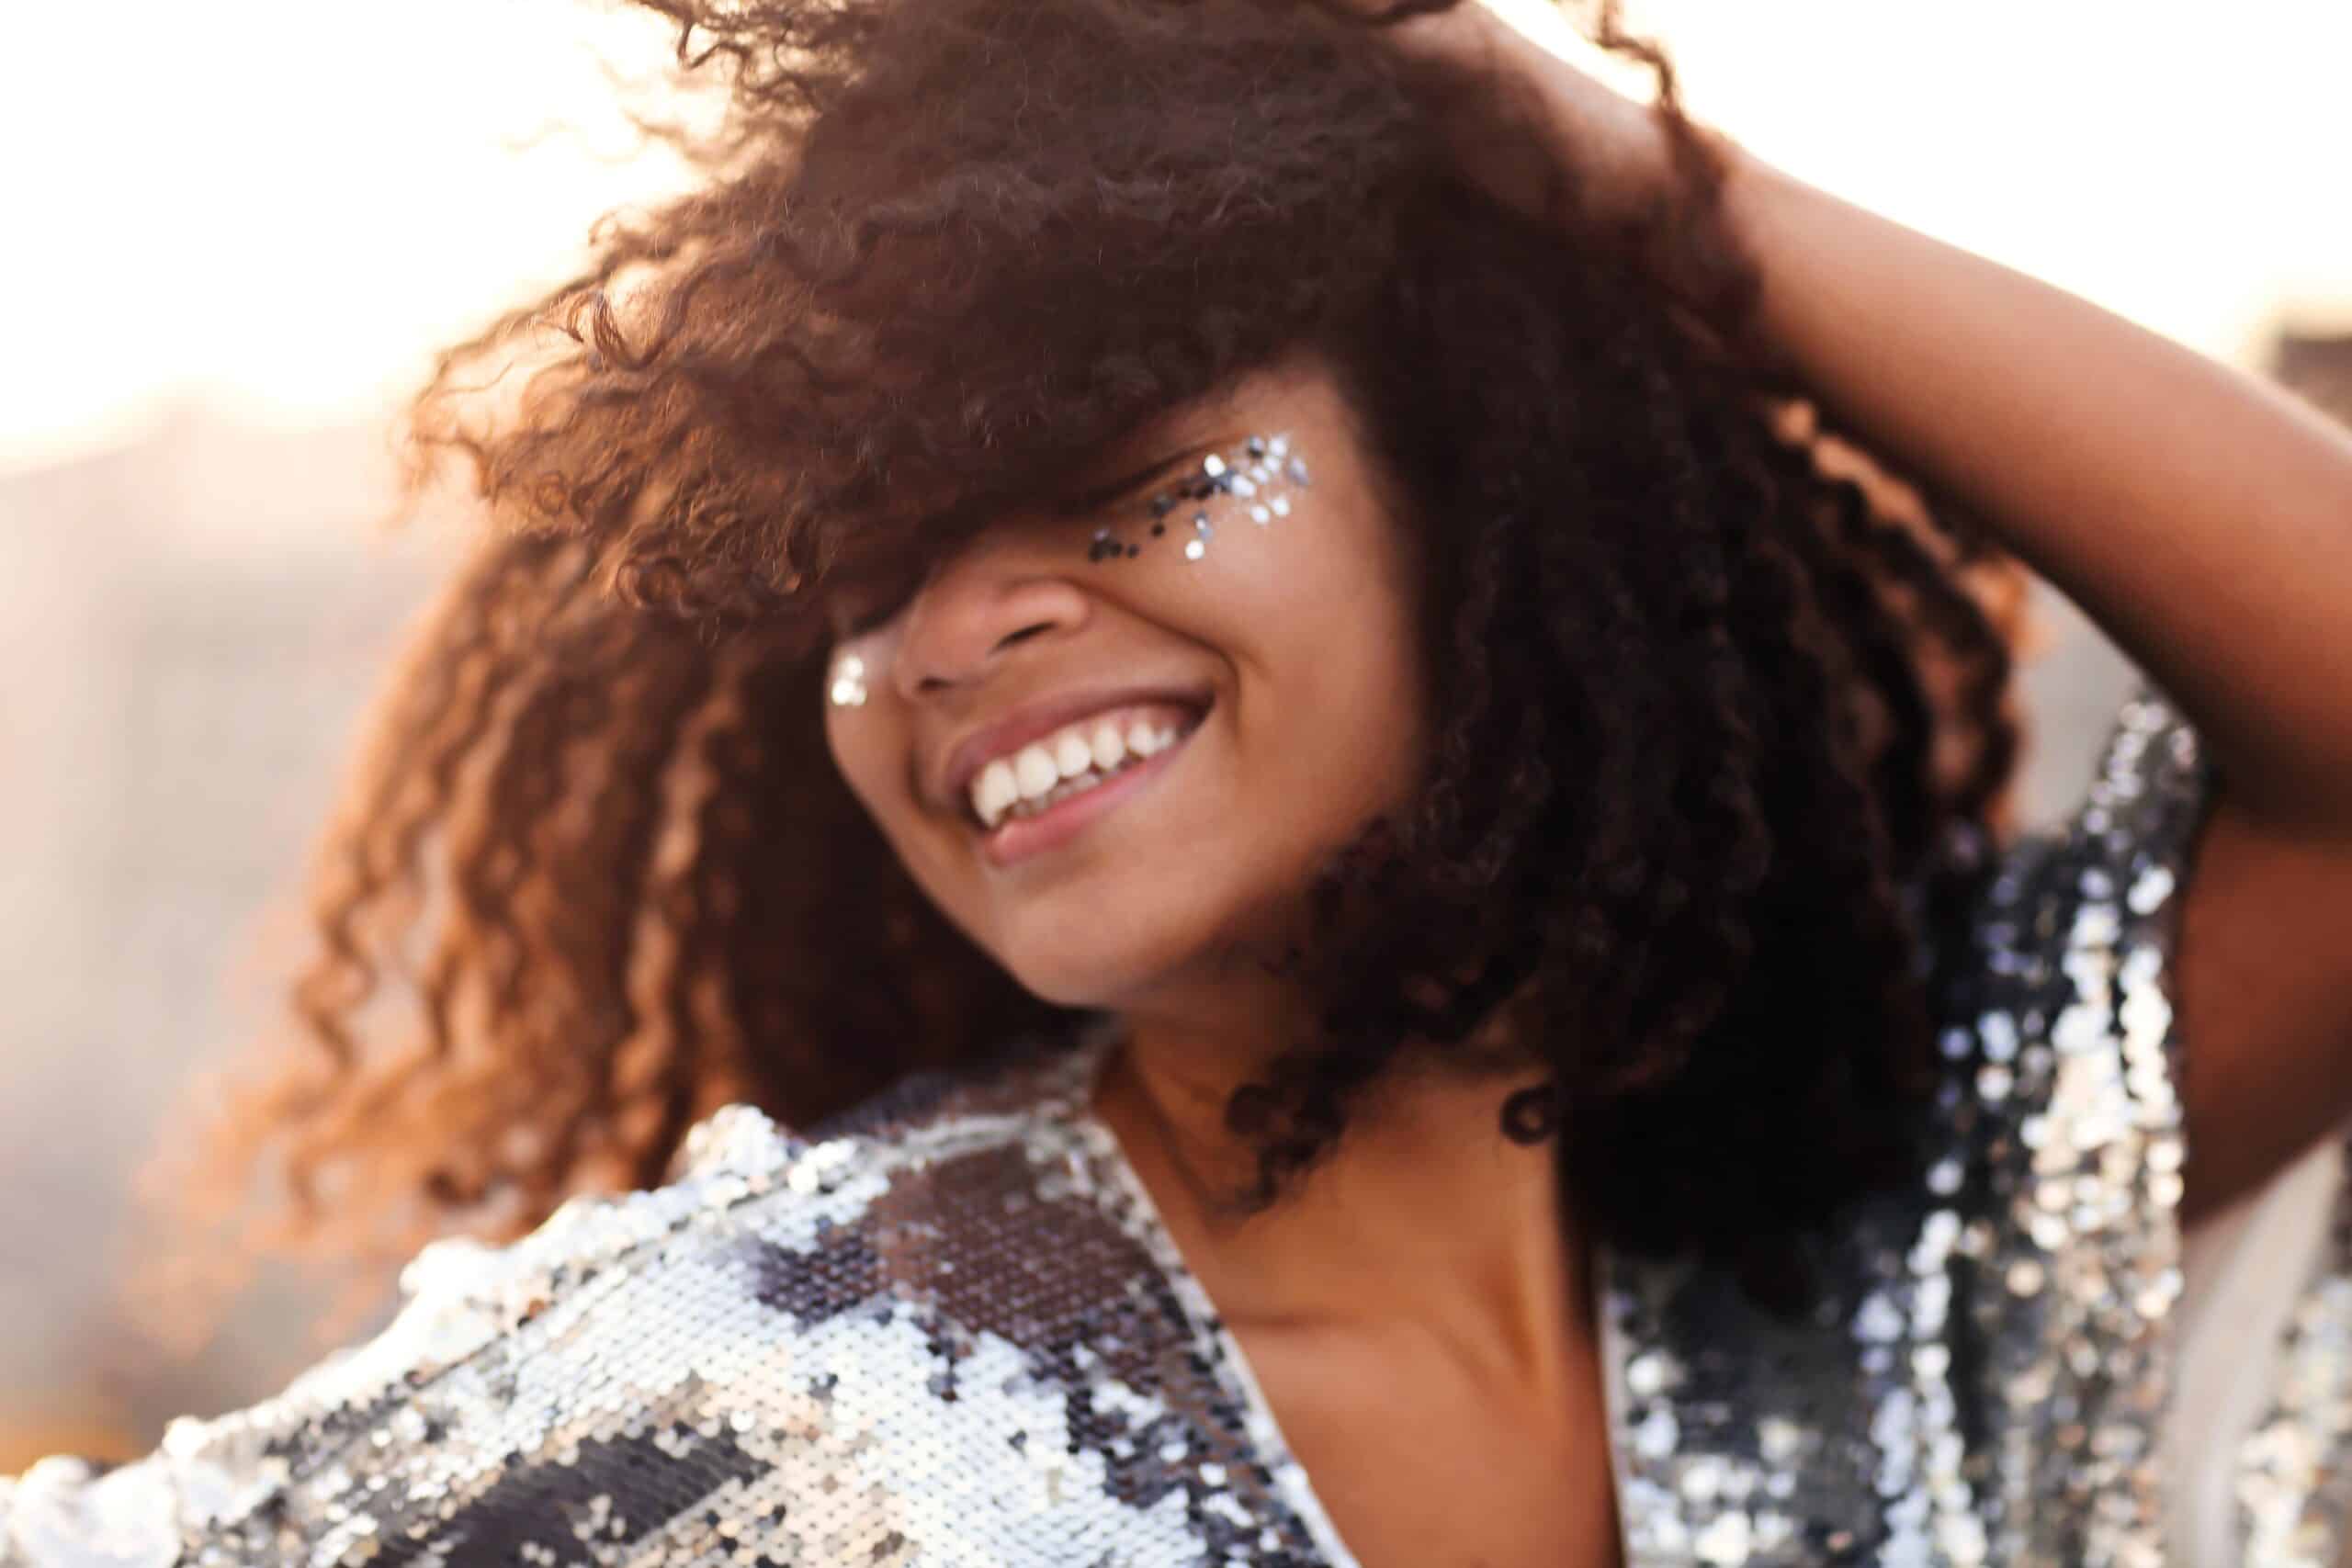 happy black woman smiling in a sparkly dress with bling makeup around eyes